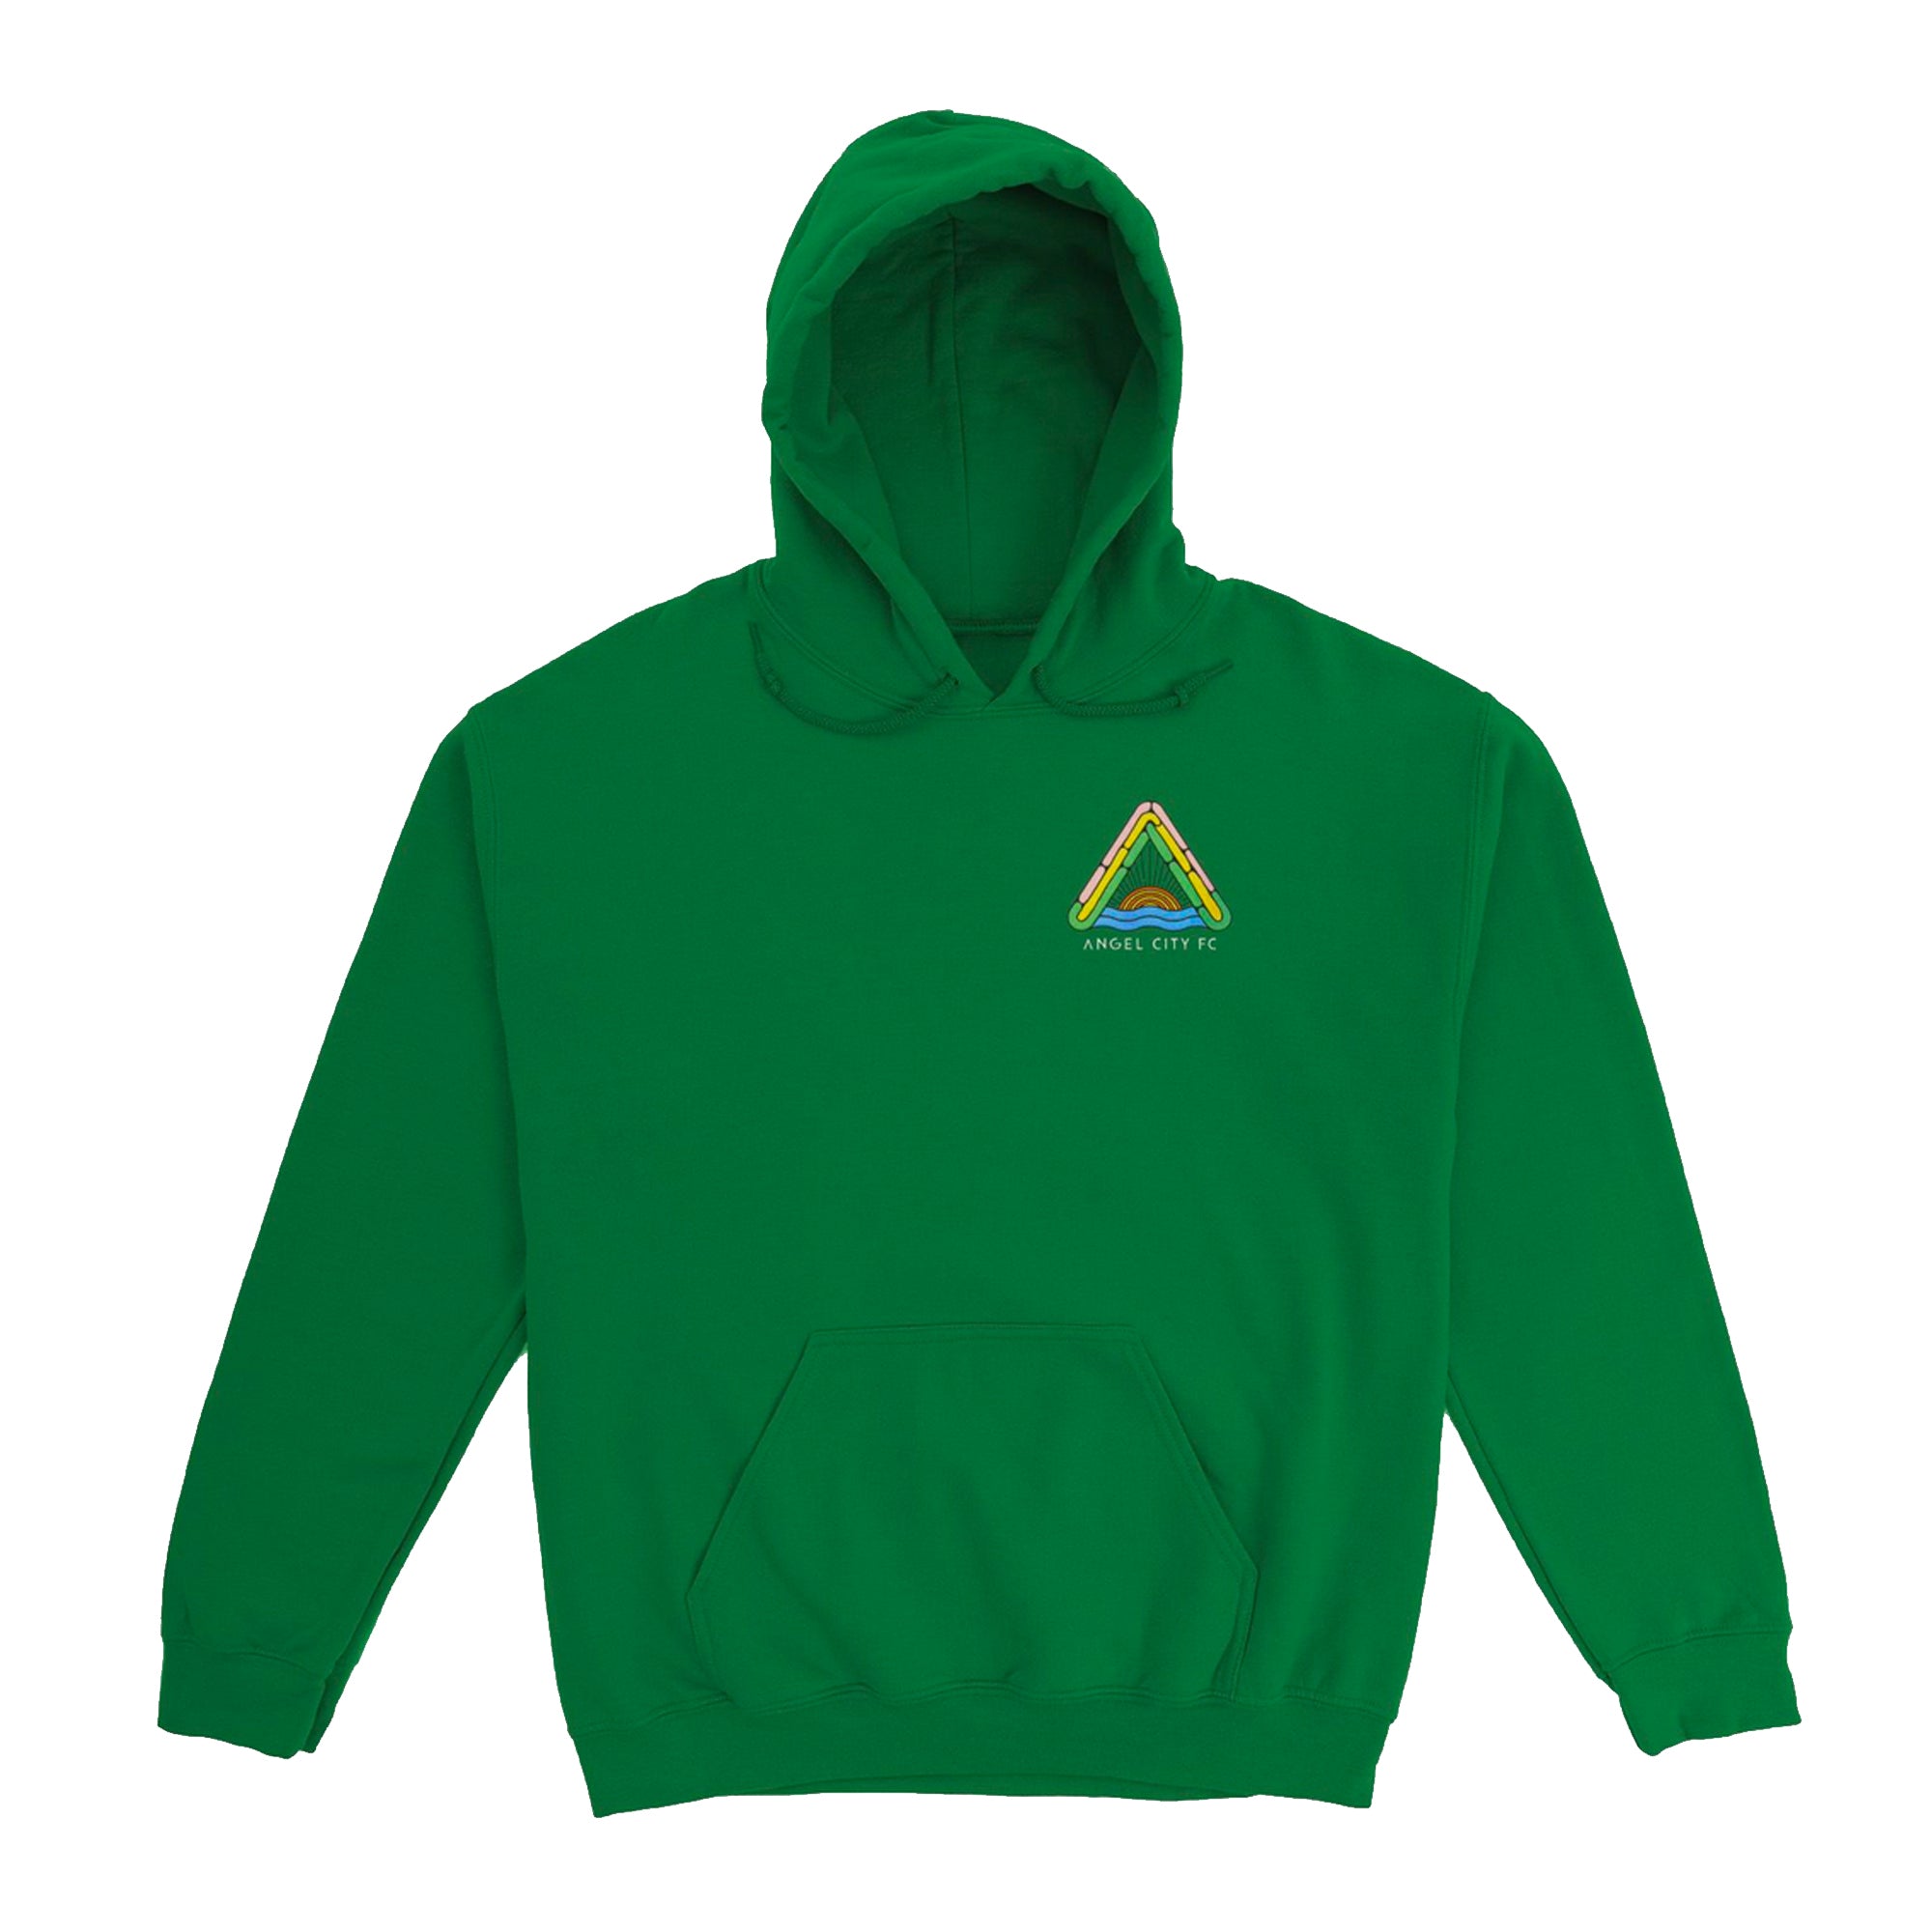 ARP ACFC Hoodie - Available in three colors